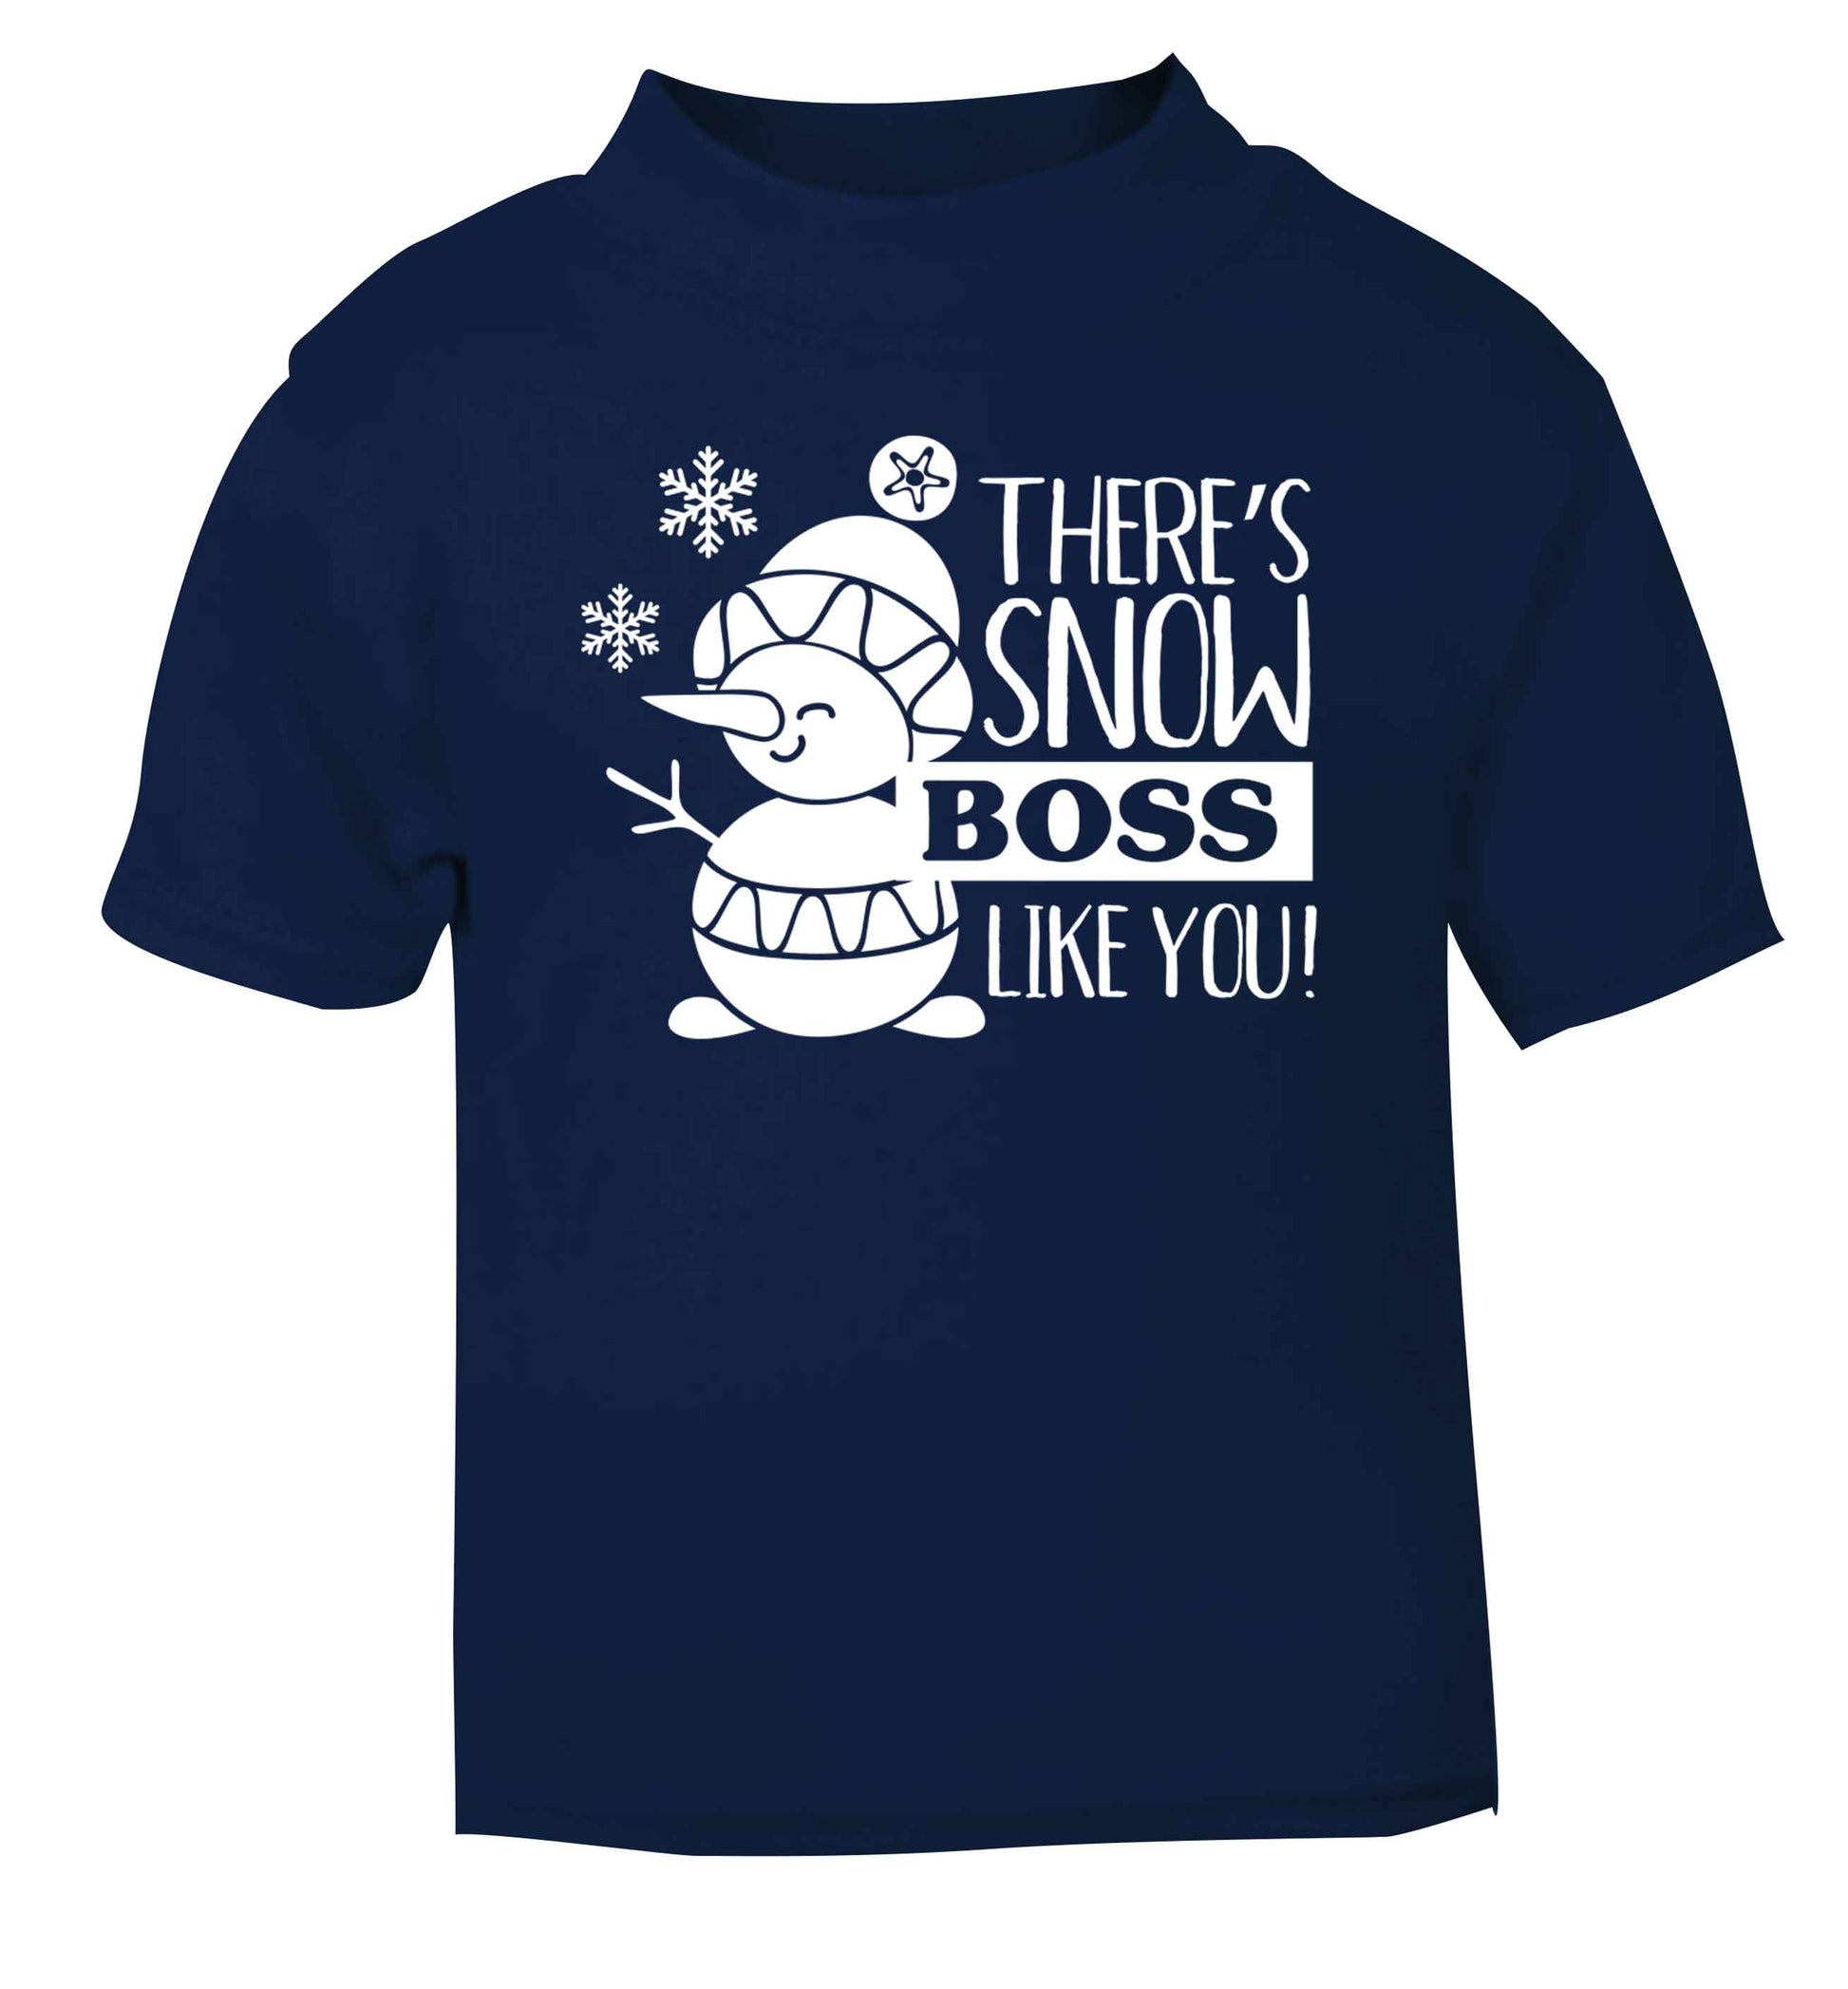 There's snow boss like you navy baby toddler Tshirt 2 Years